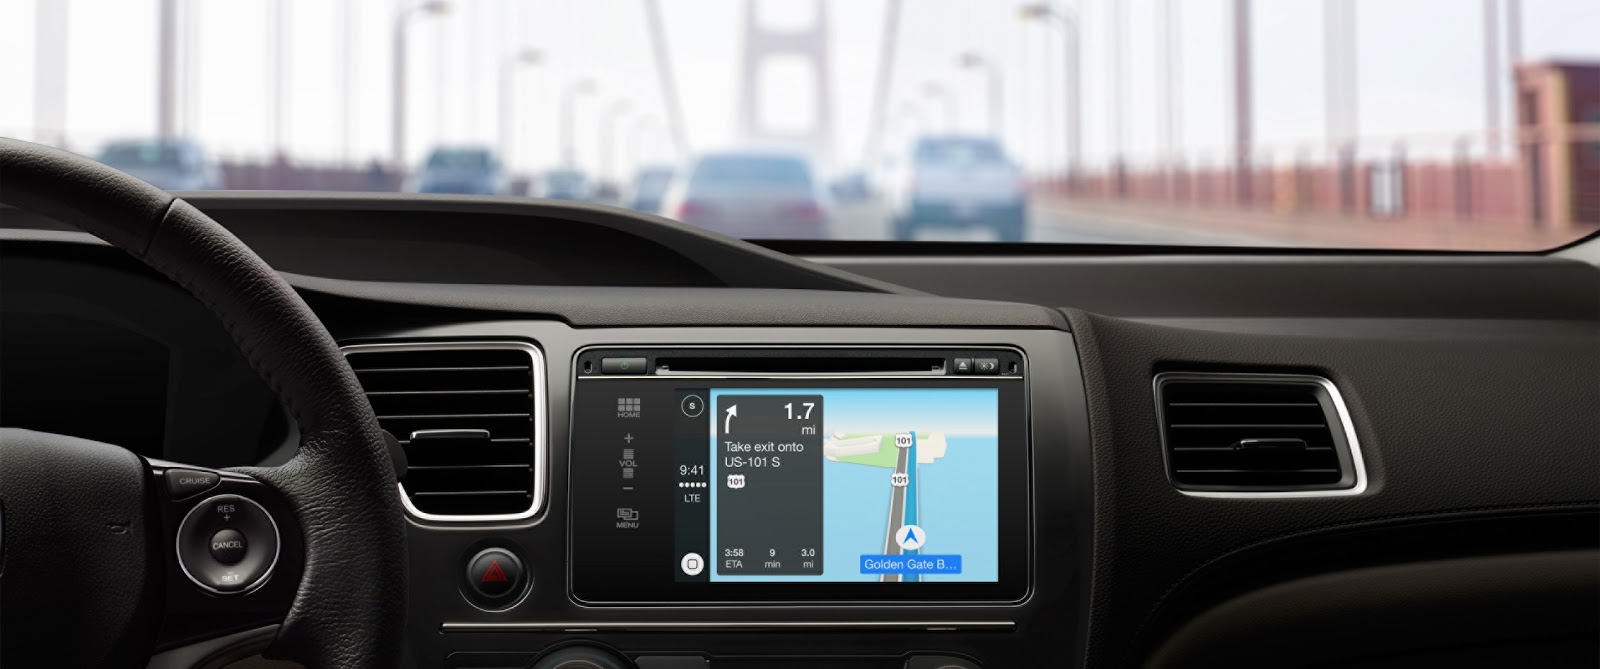 Volvo Posts Its New Video Of Apple's CarPlay In Action